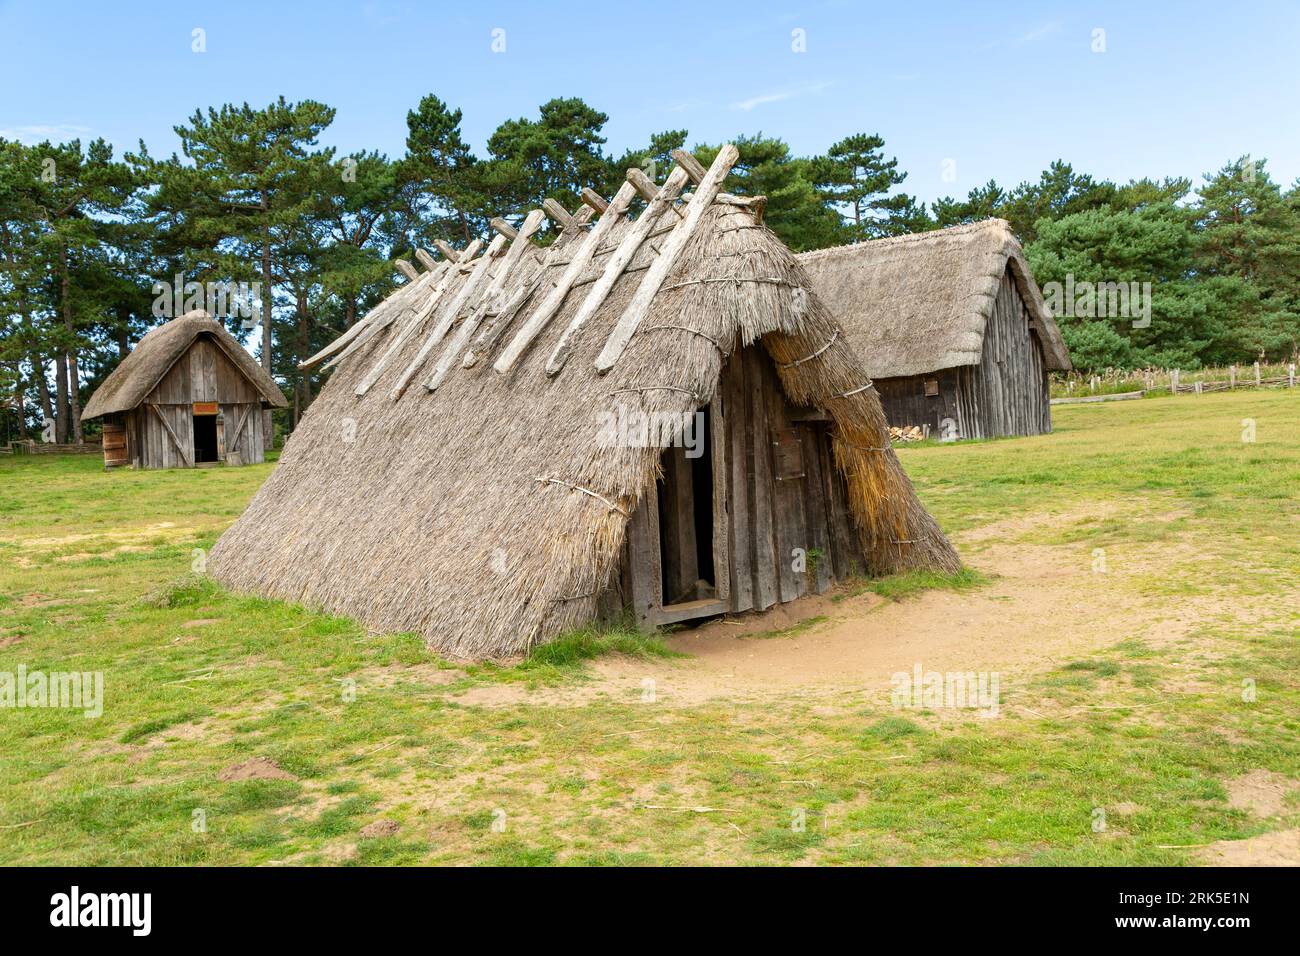 Wood and thatch buildings at West Stow, Anglo-Saxon village, Suffolk, England, UK Stock Photo